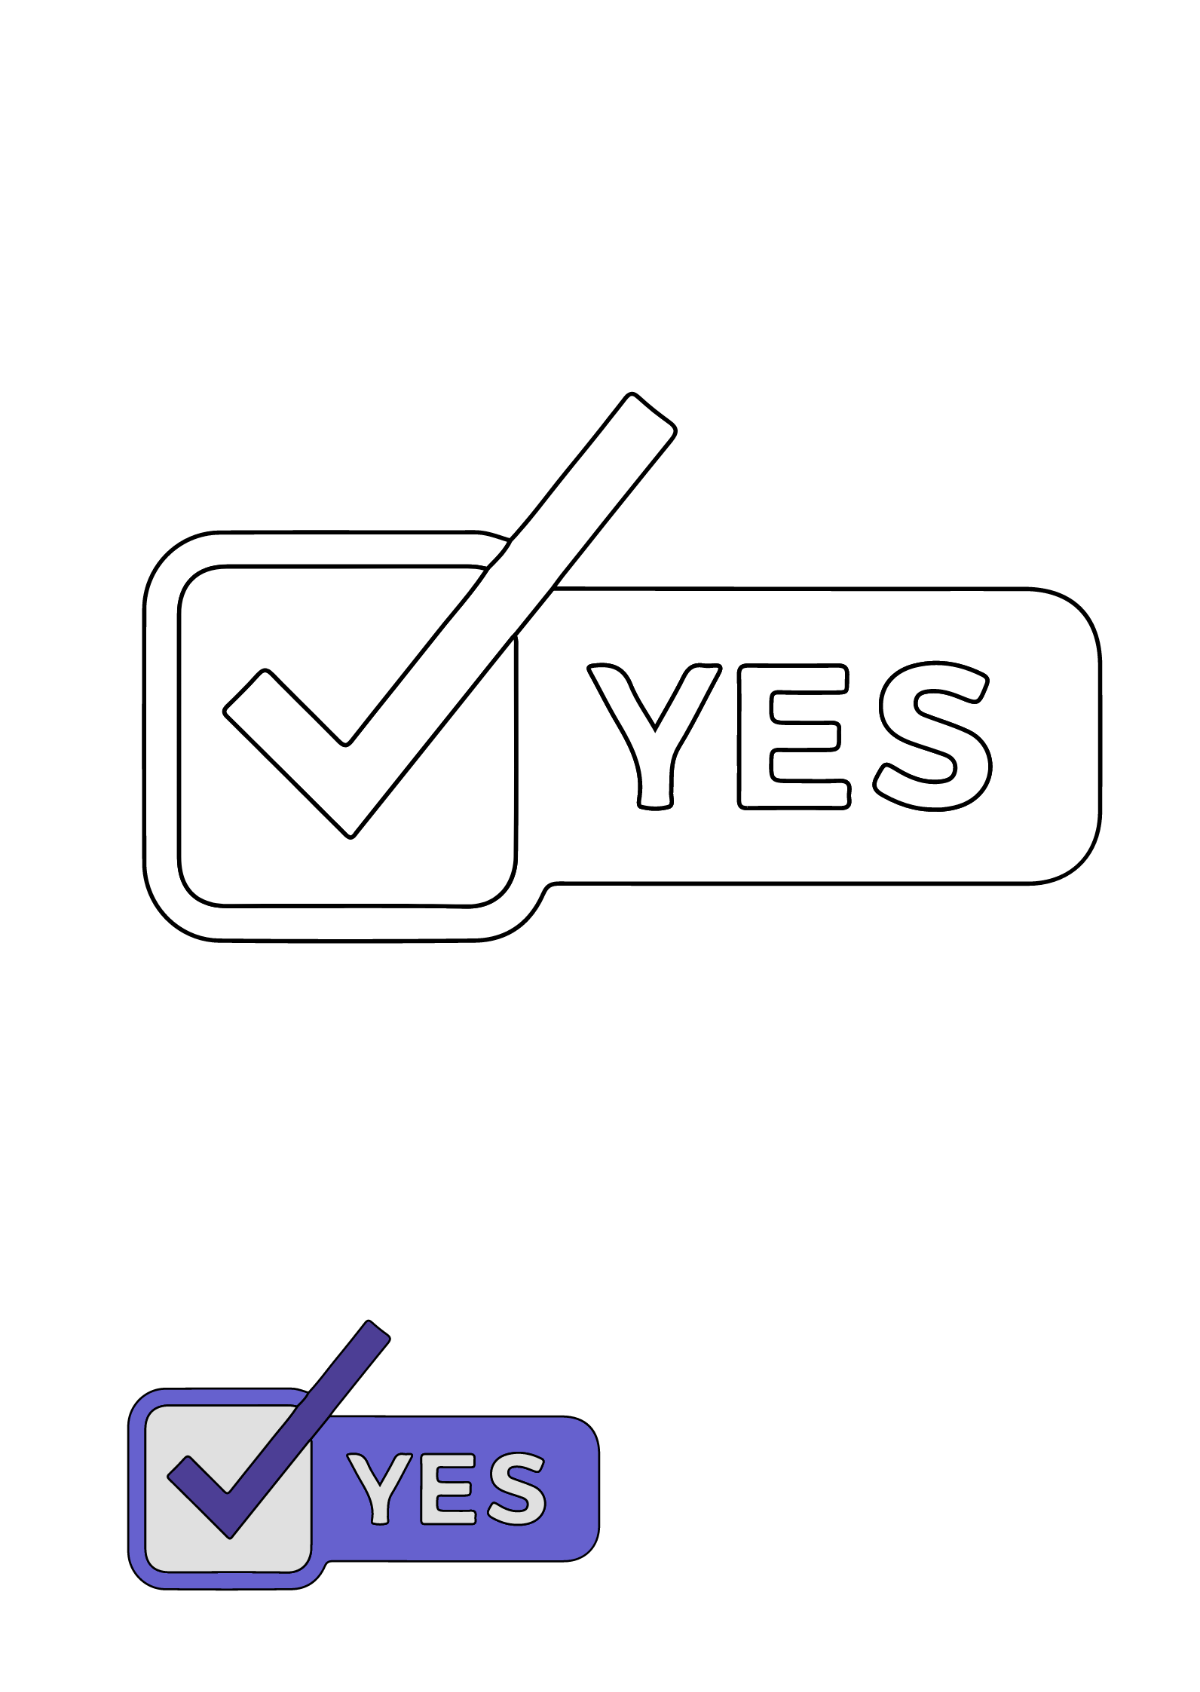 Yes Tick Mark coloring page Template